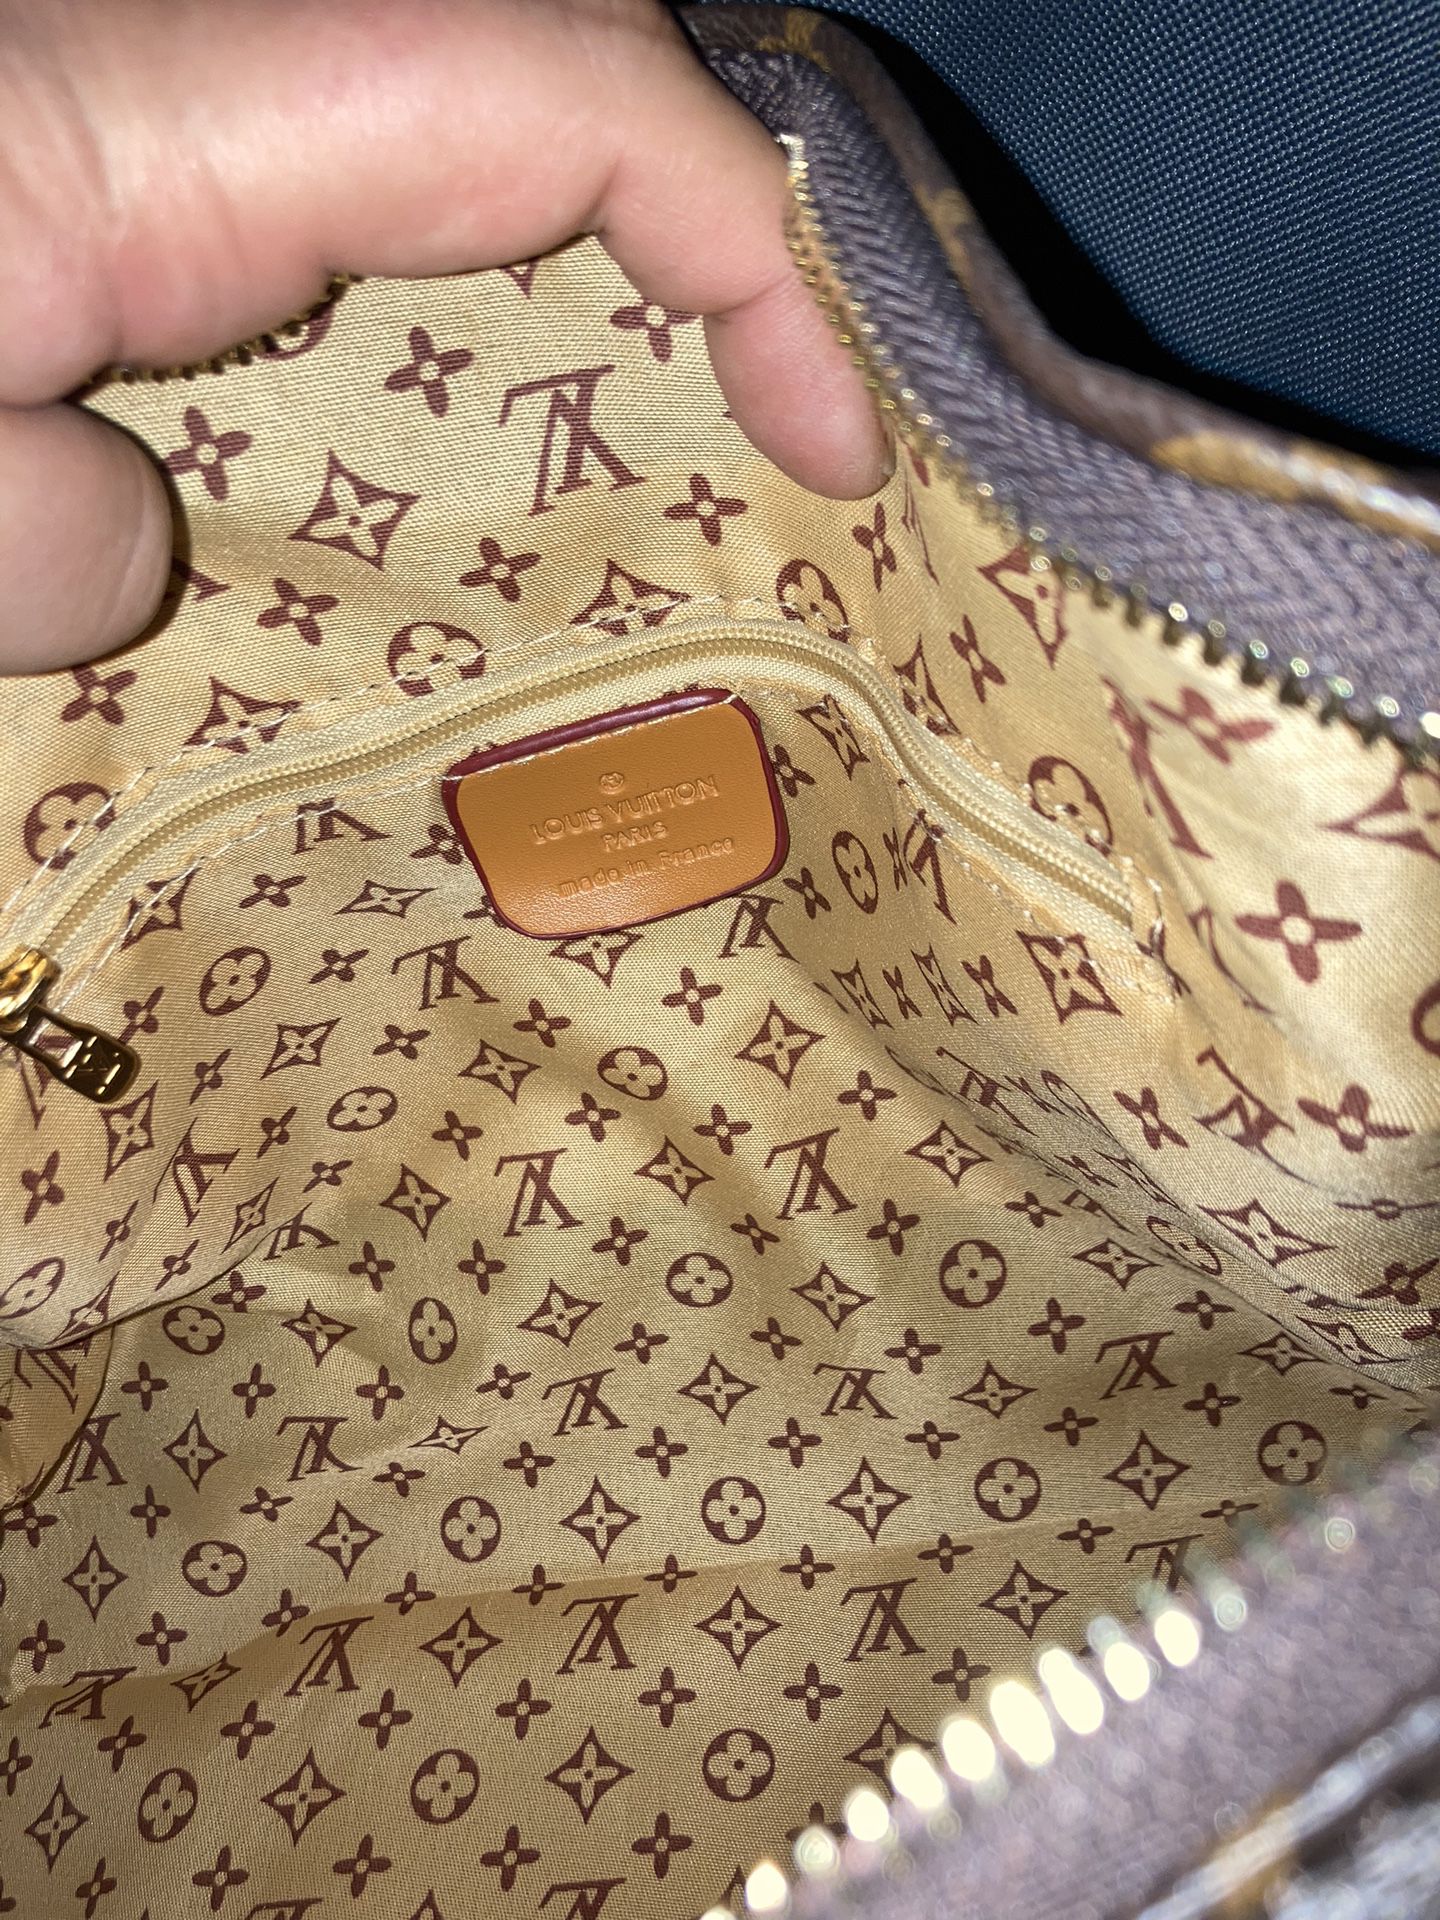 Louis Vuitton Orsay Clutch for Sale in Spring, TX - OfferUp